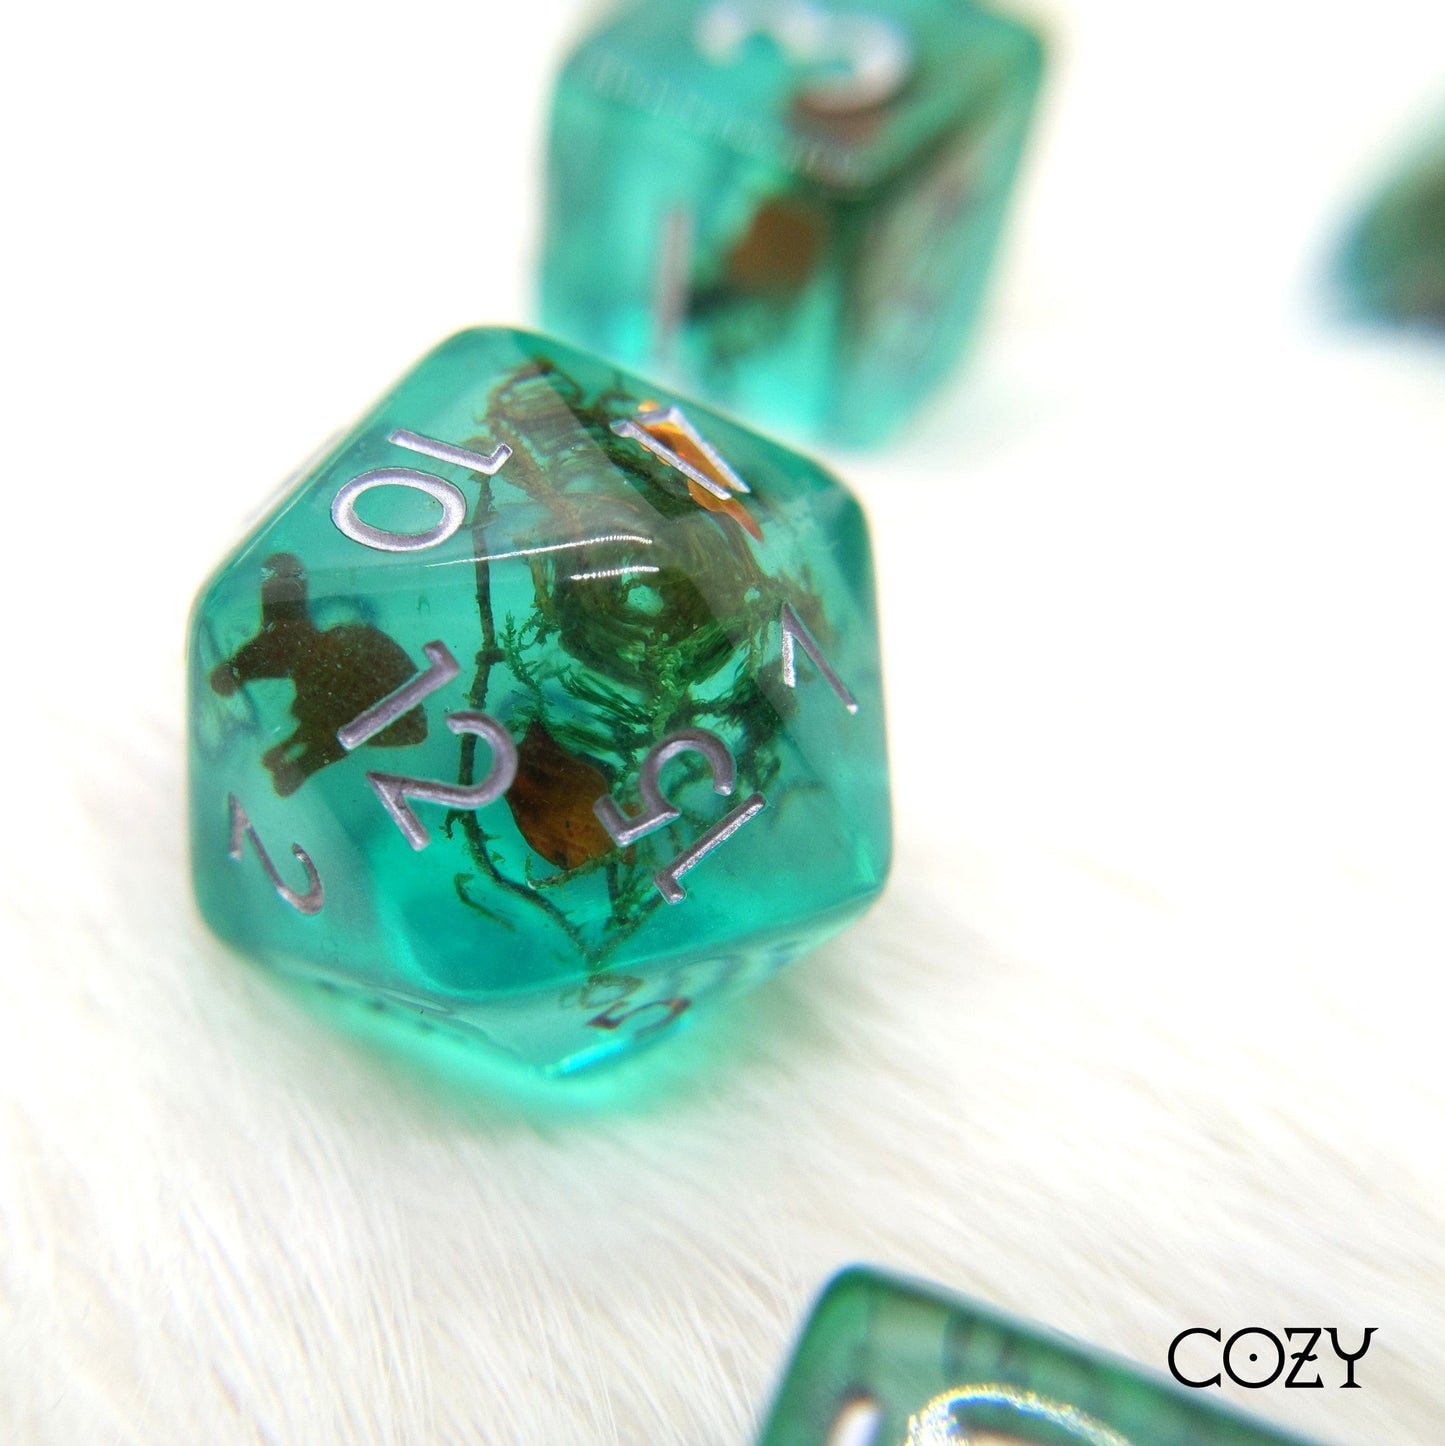 Goldfish Pond. Teal resin dice set with gold fish and plants